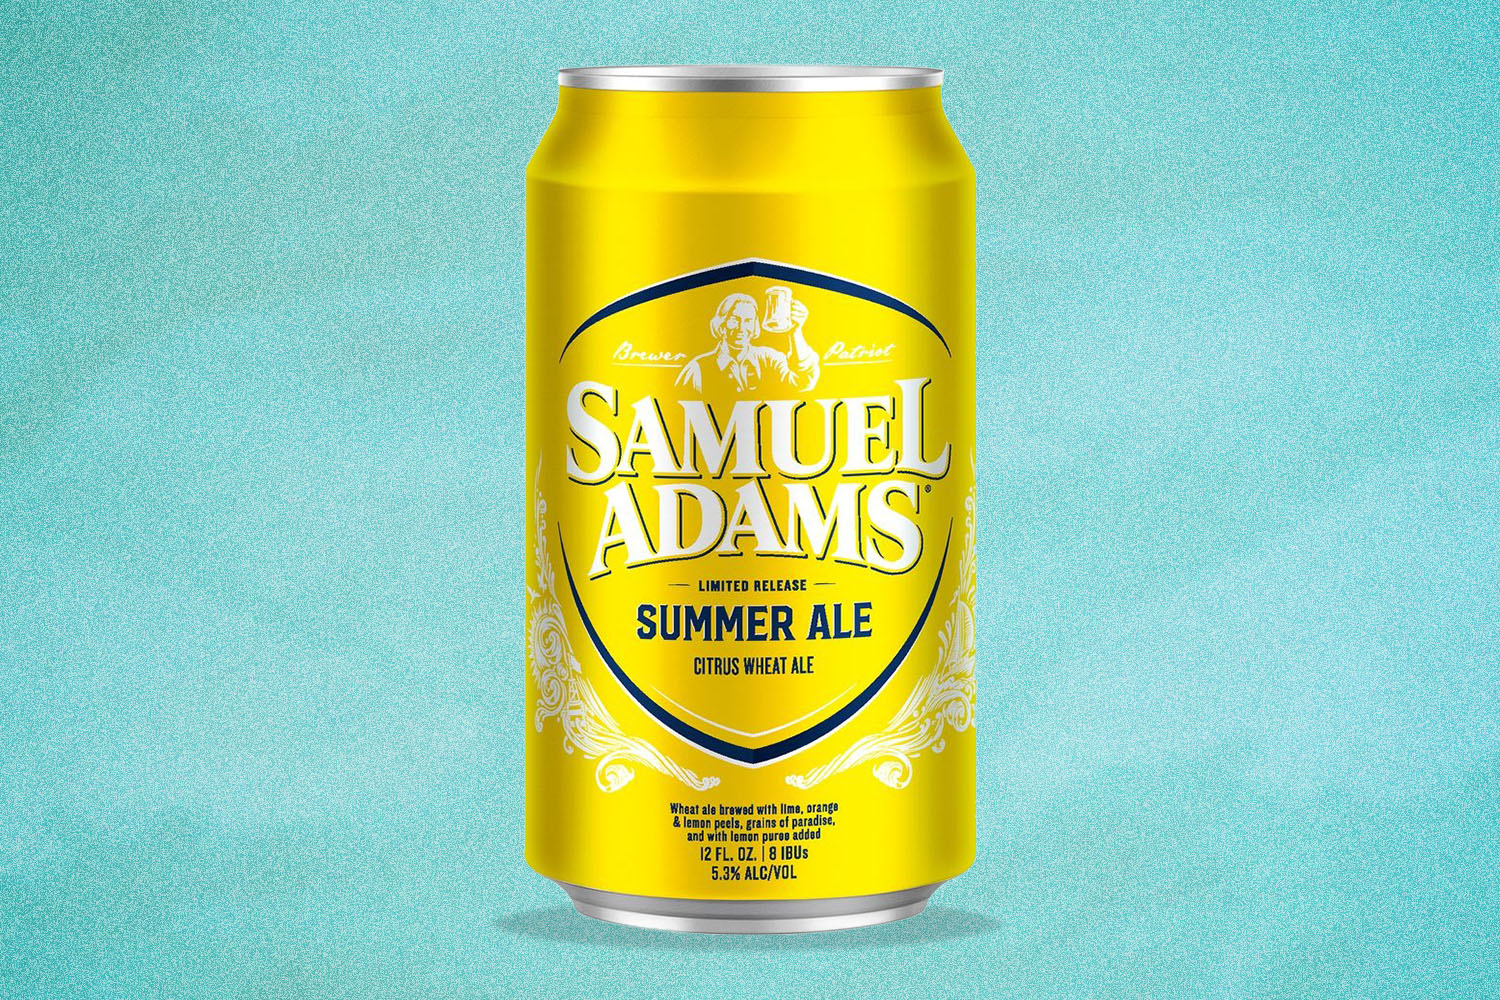 what-the-heck-is-a-summer-ale-anyway-insidehook